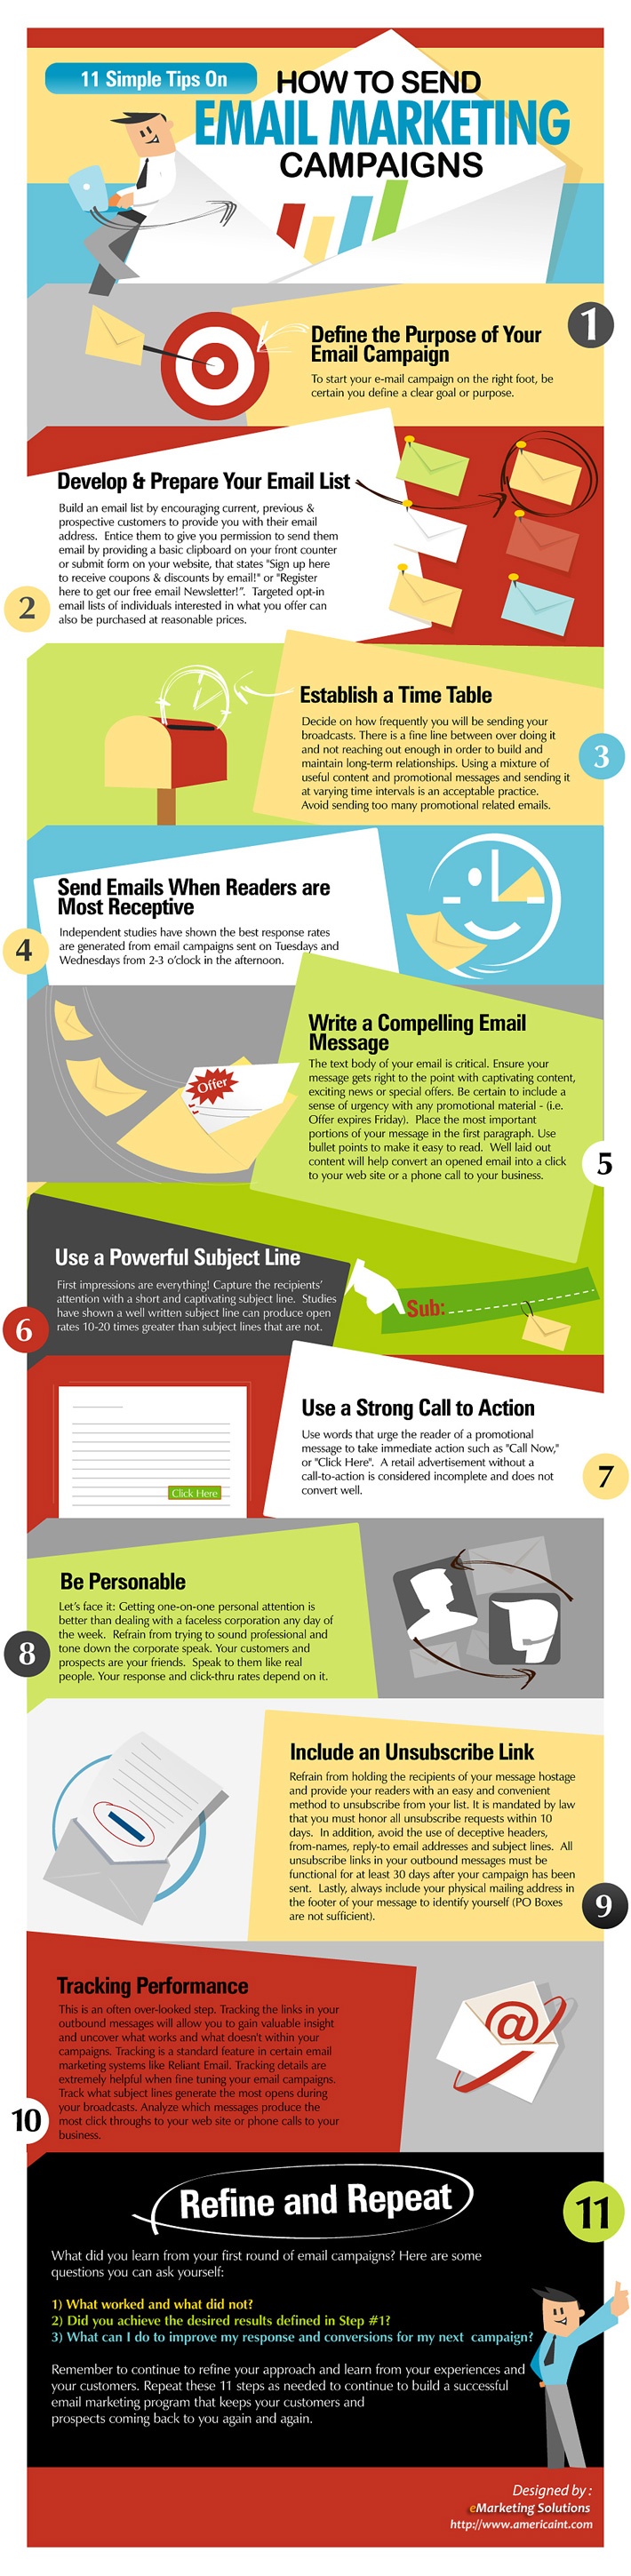 11 Simple Tips On Email Marketing Campaigns